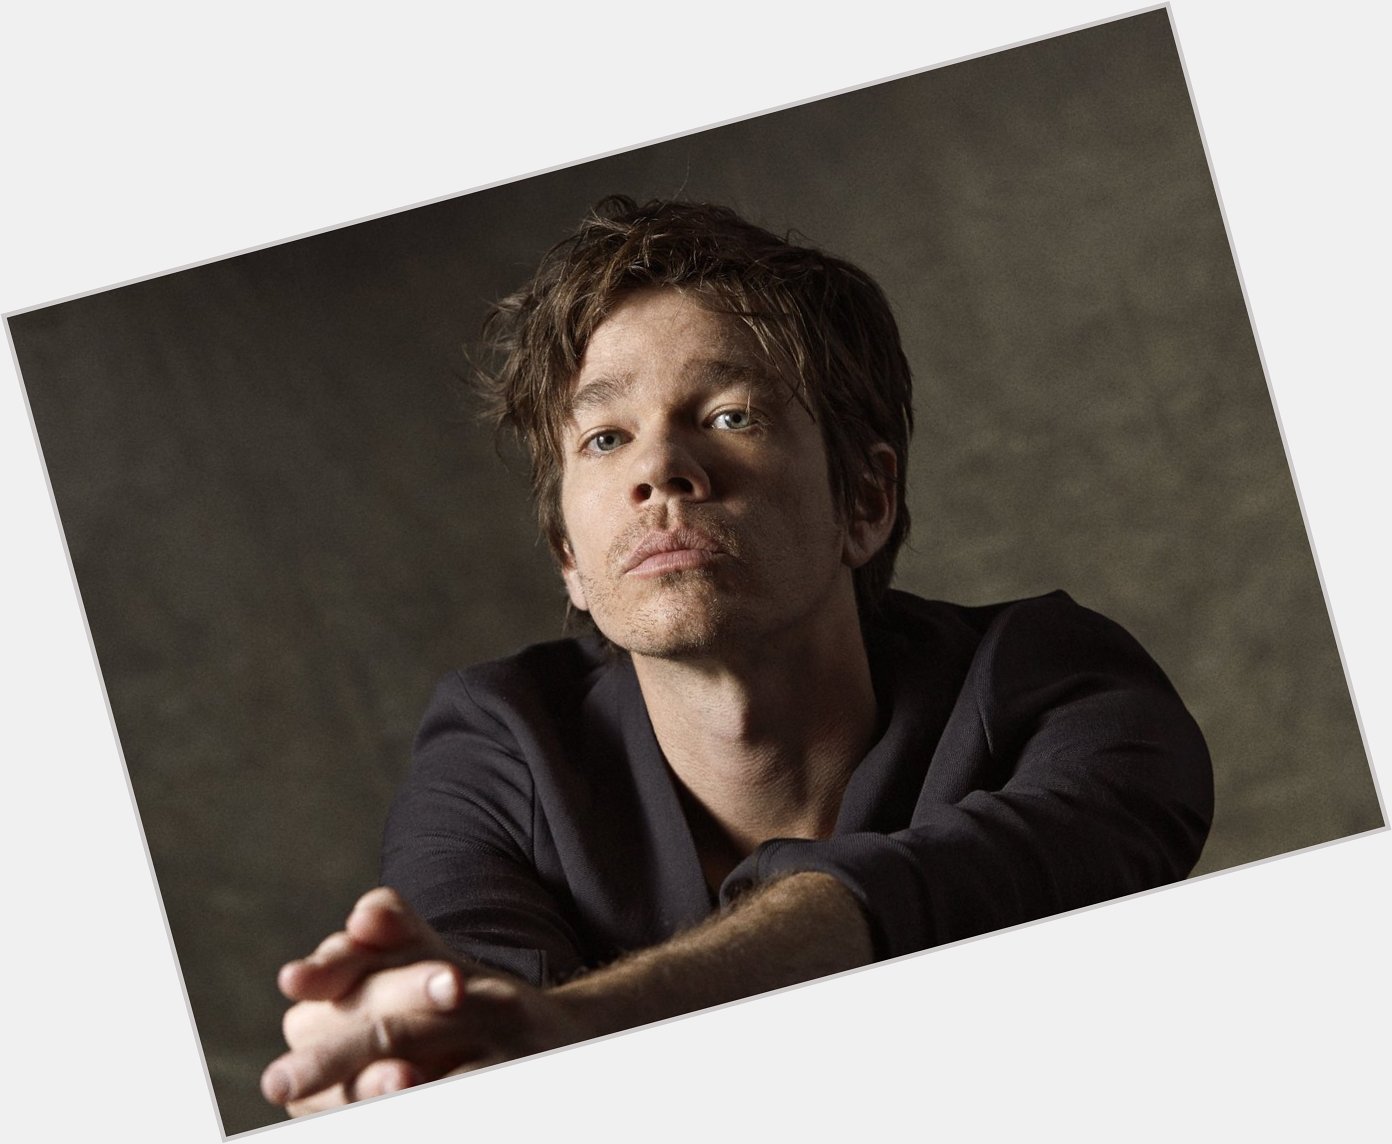 Happy 41st birthday to Nate Ruess! The 11th Anniversary of Some Nights from 